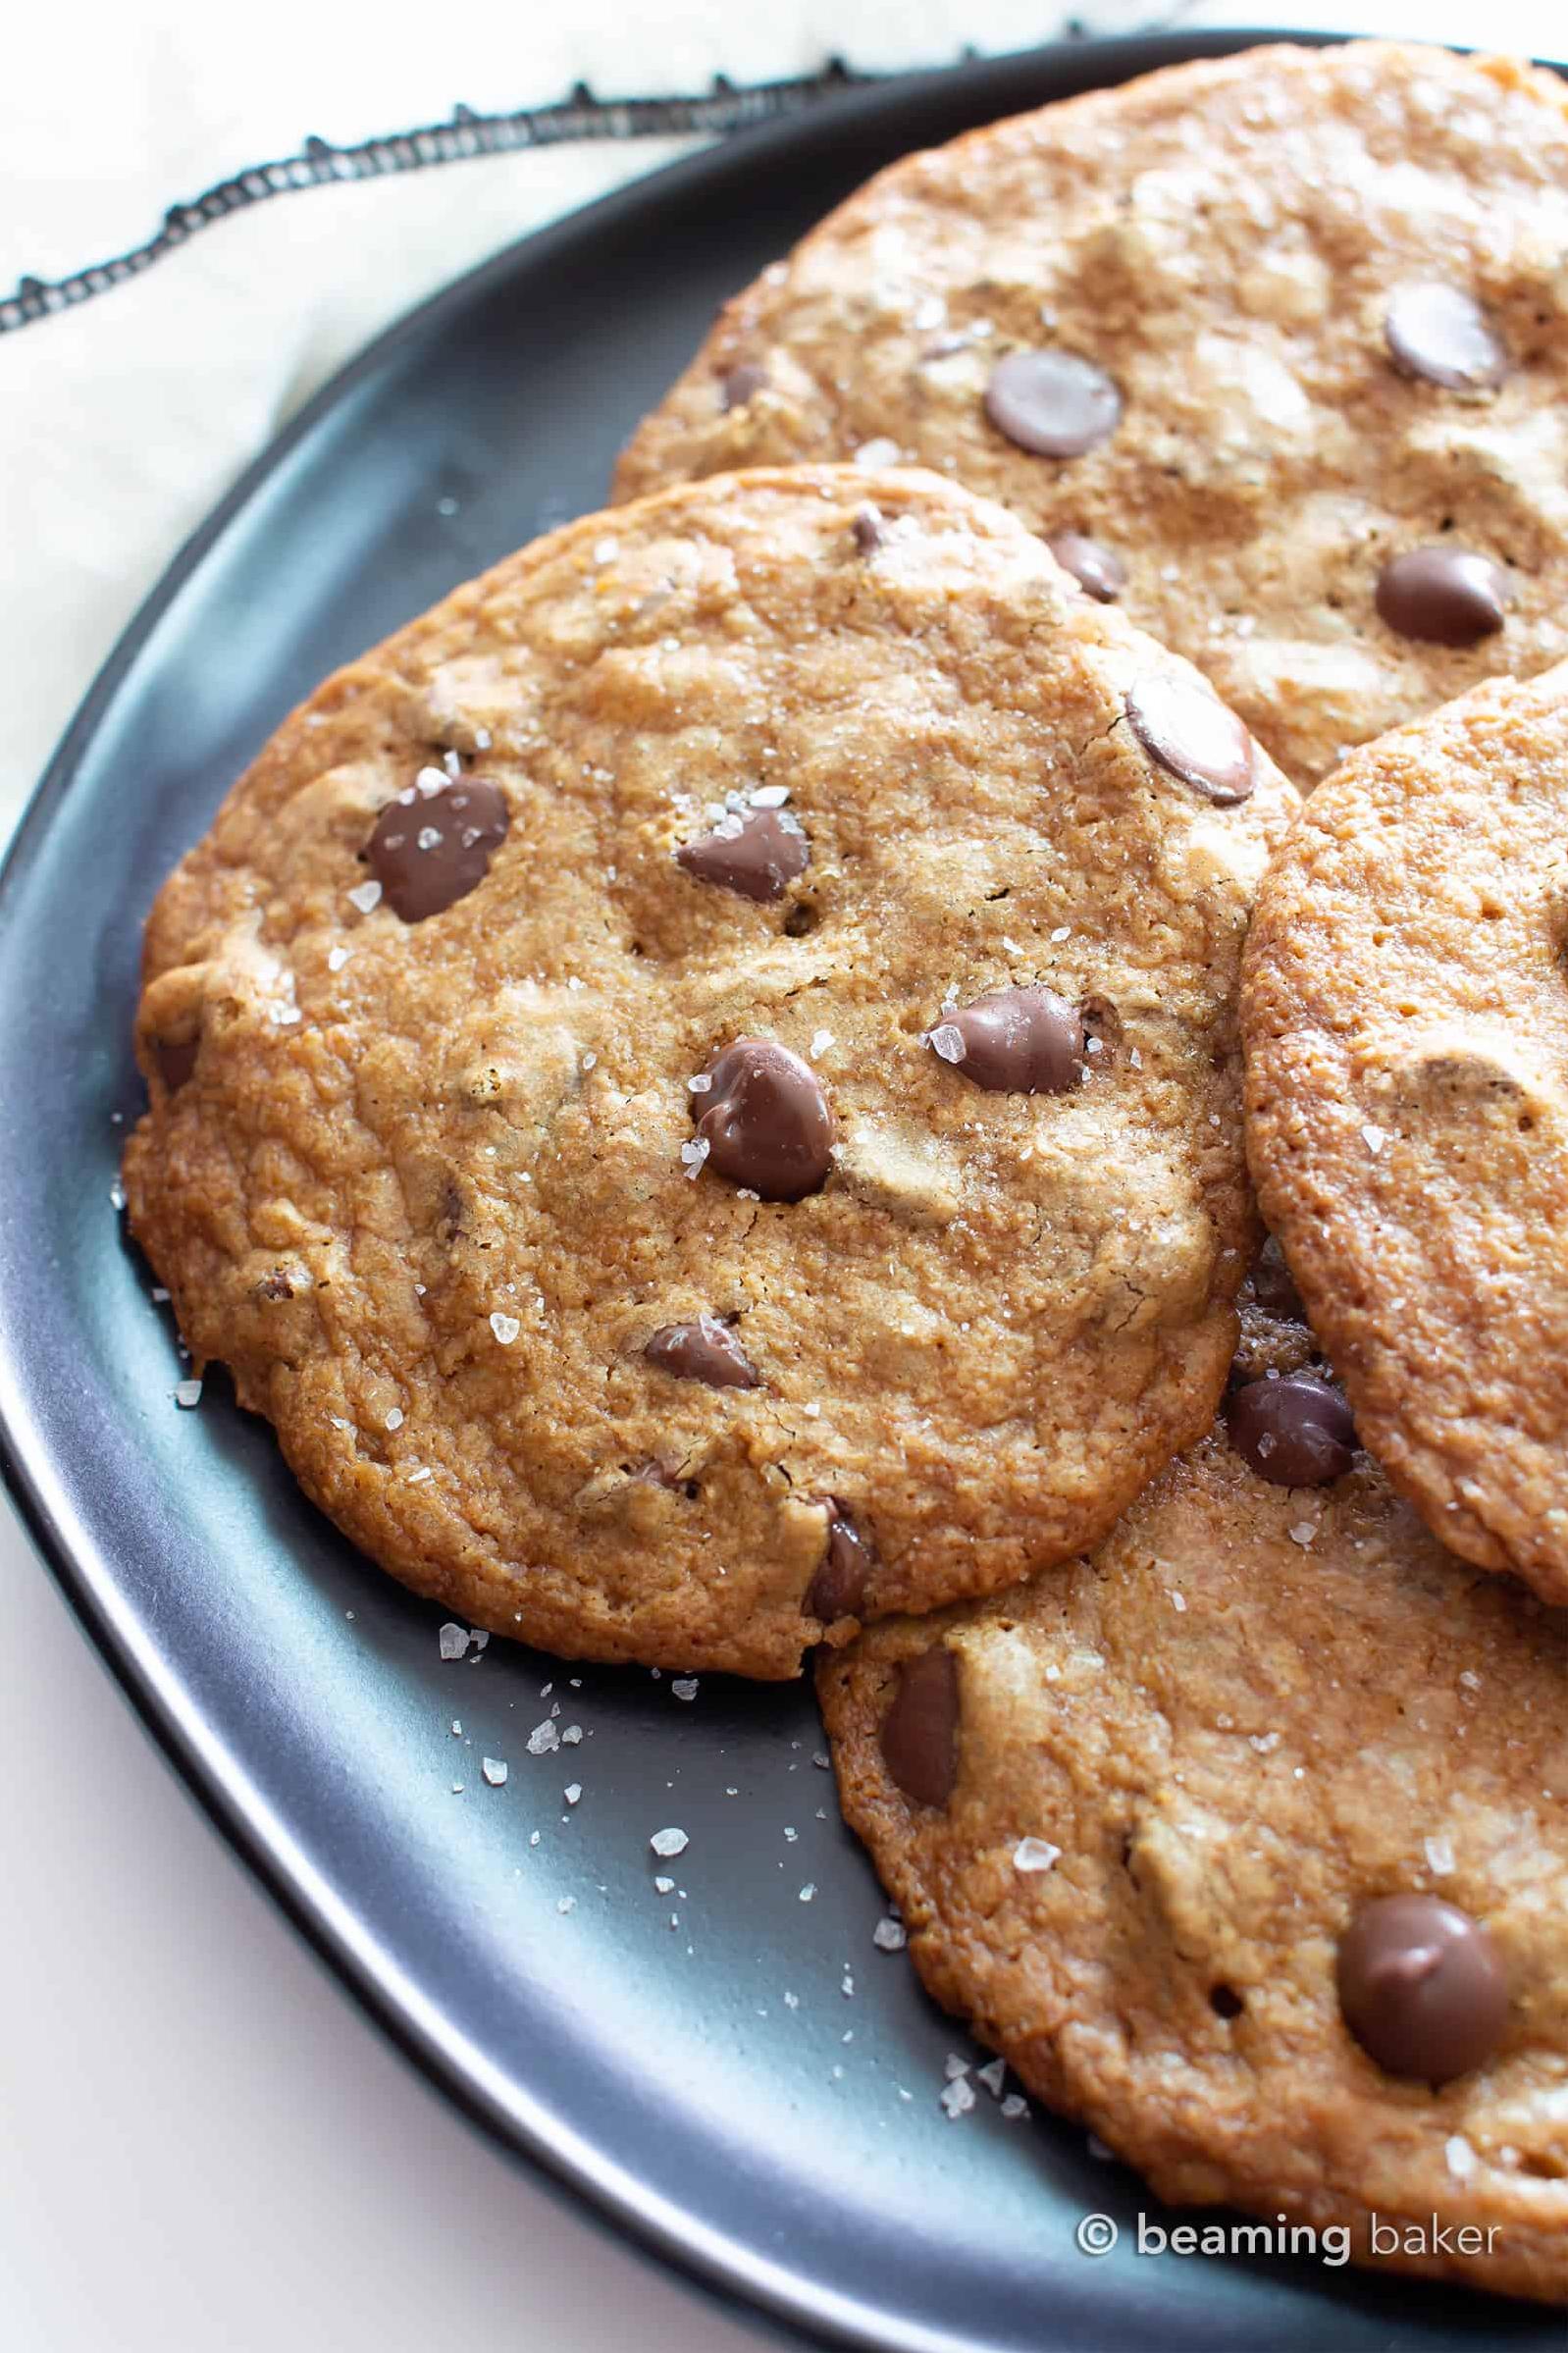  Say goodbye to boring gluten-free snacks and hello to these irresistible vegan cookies.